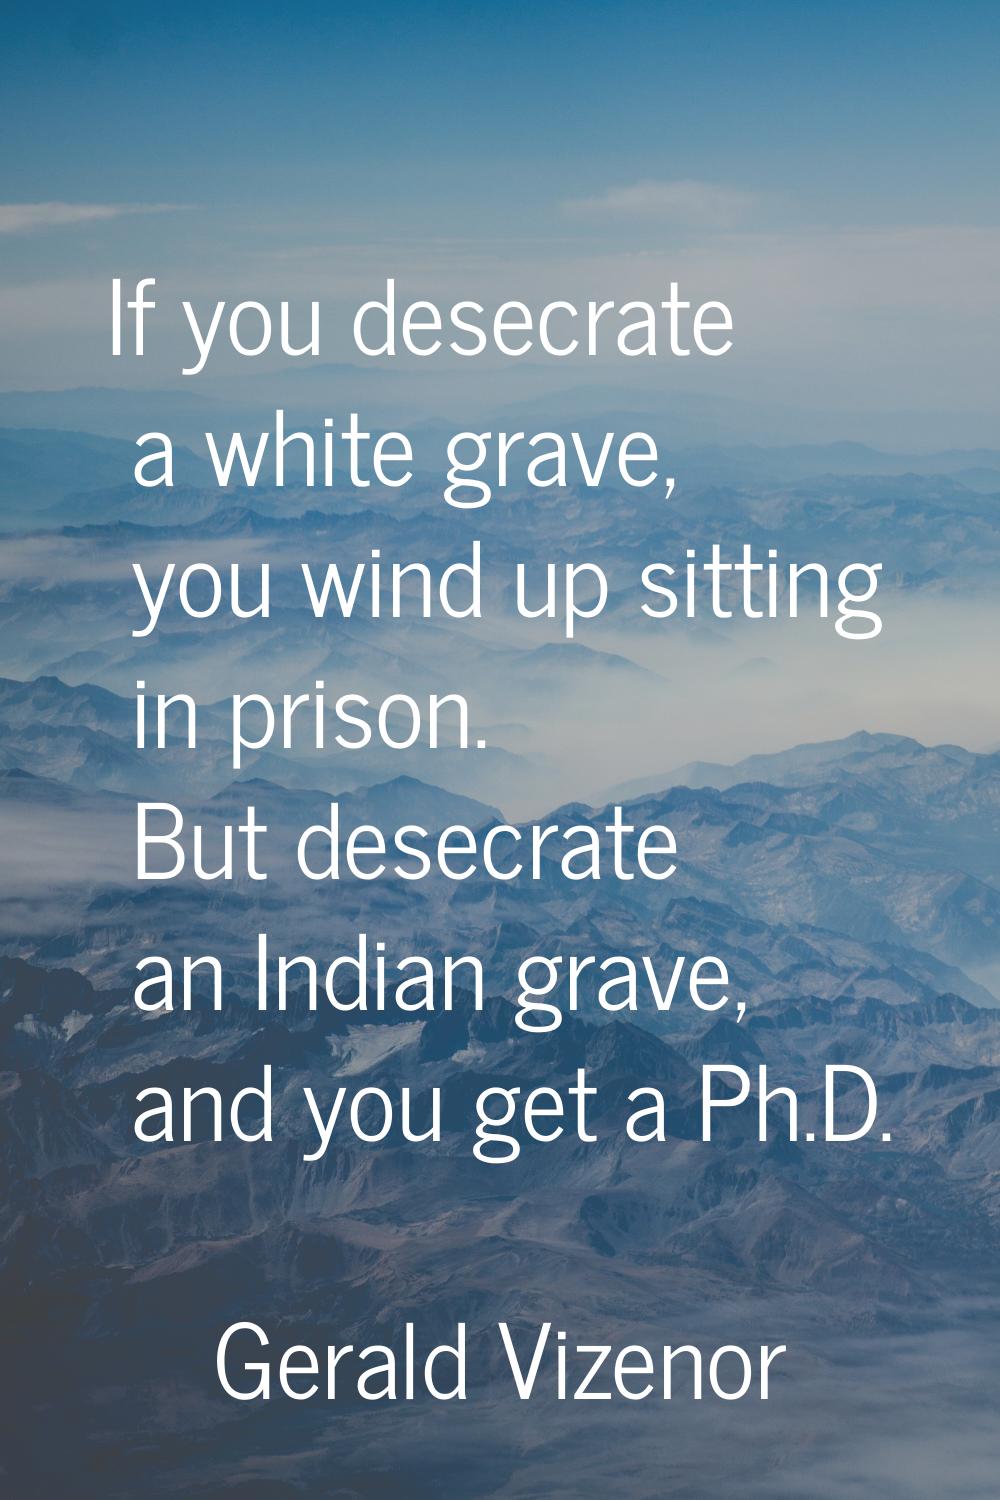 If you desecrate a white grave, you wind up sitting in prison. But desecrate an Indian grave, and y